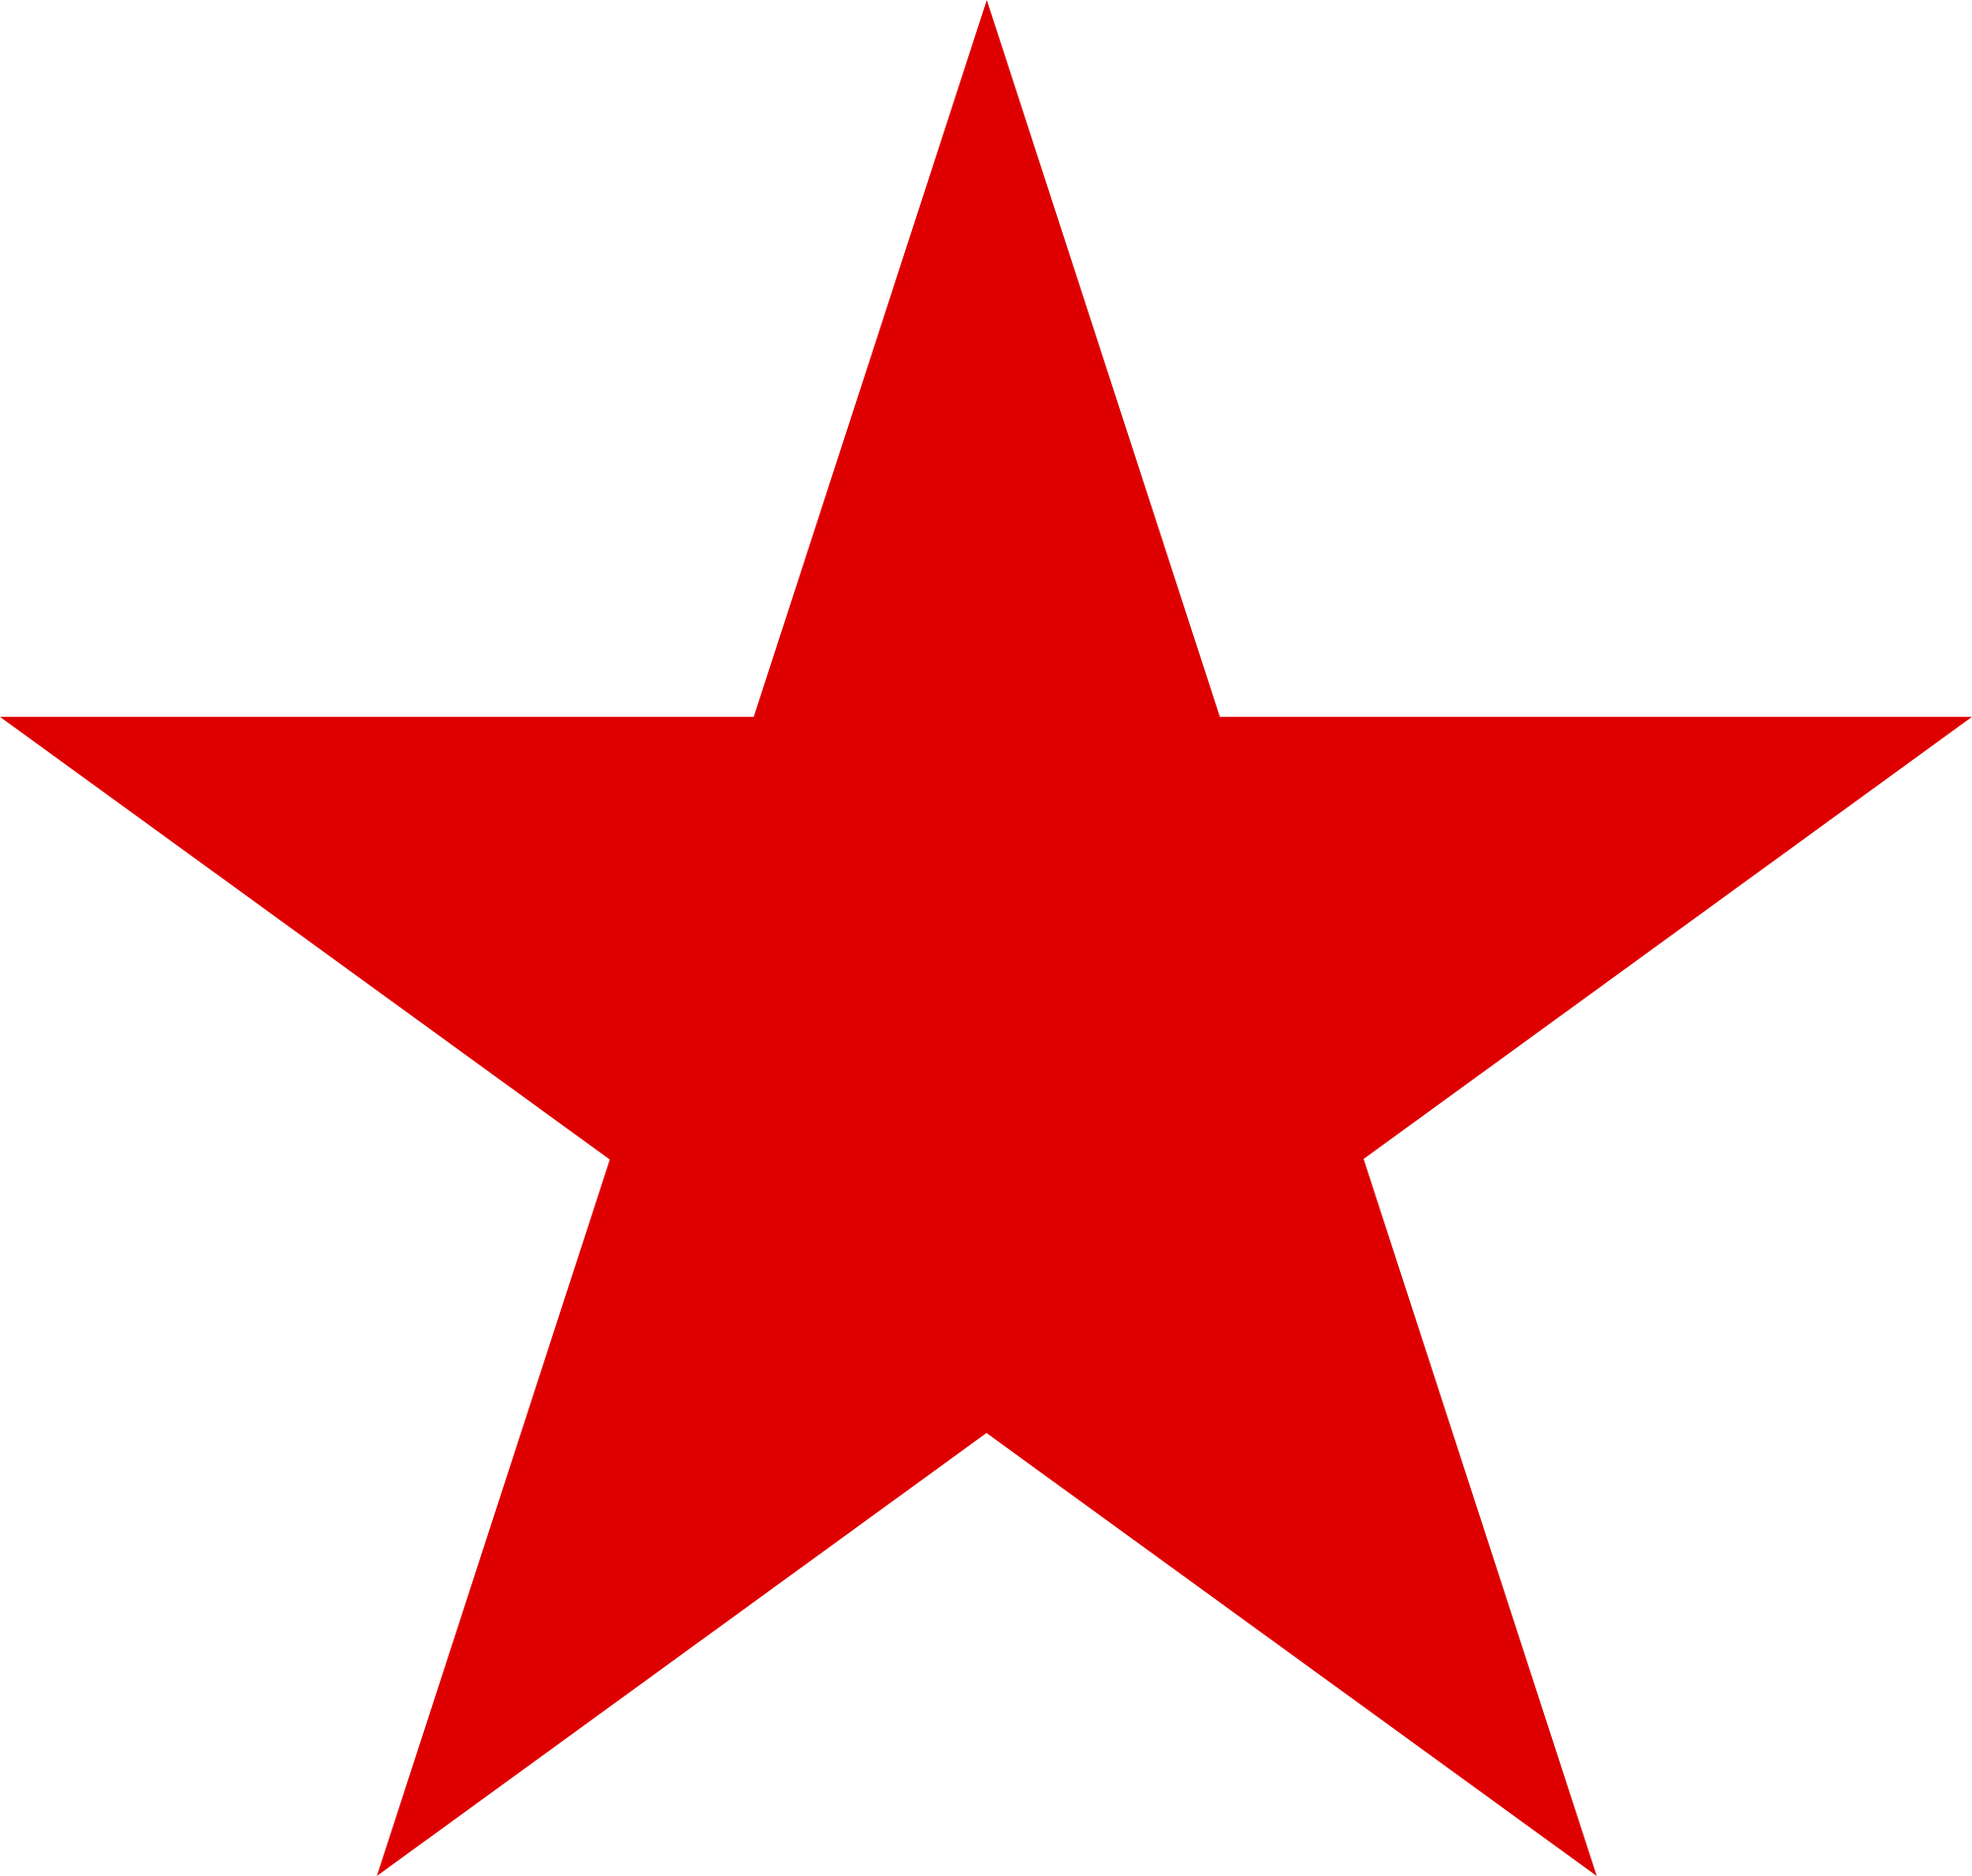 Russian Star Roundel - ClipArt Best